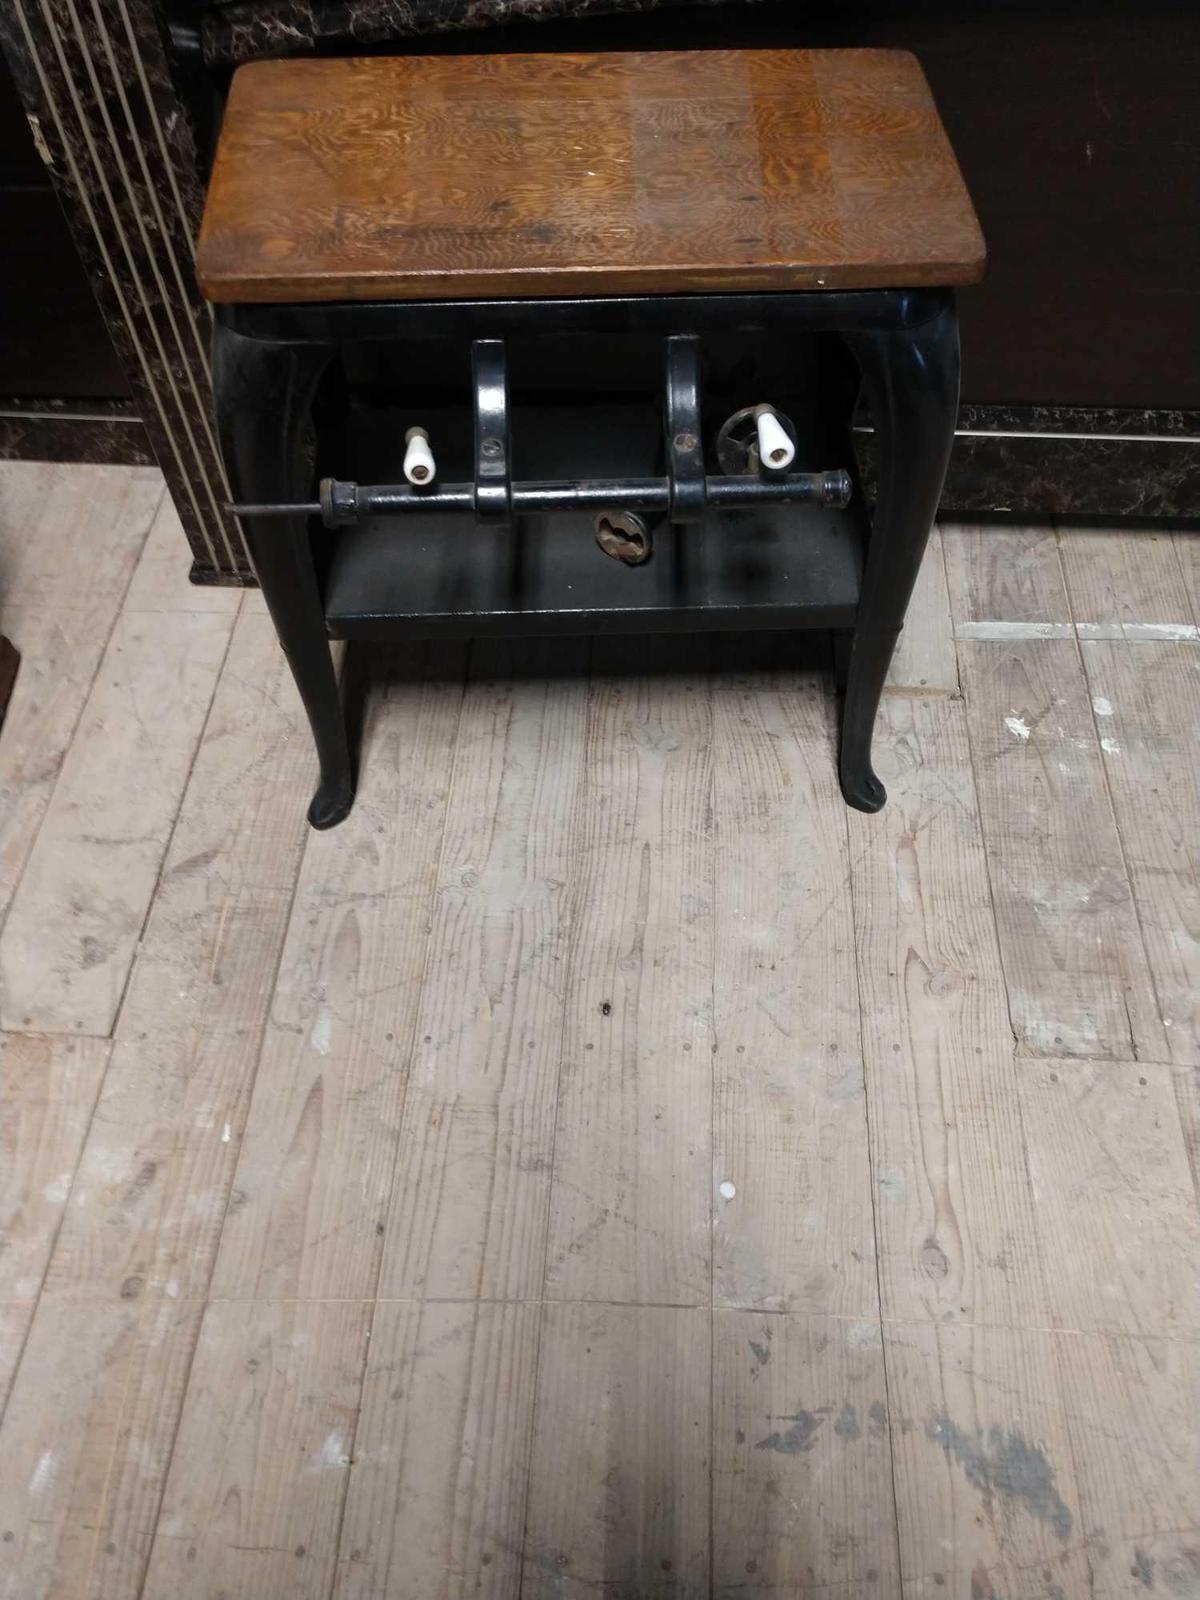 Small gas stove with Wood top